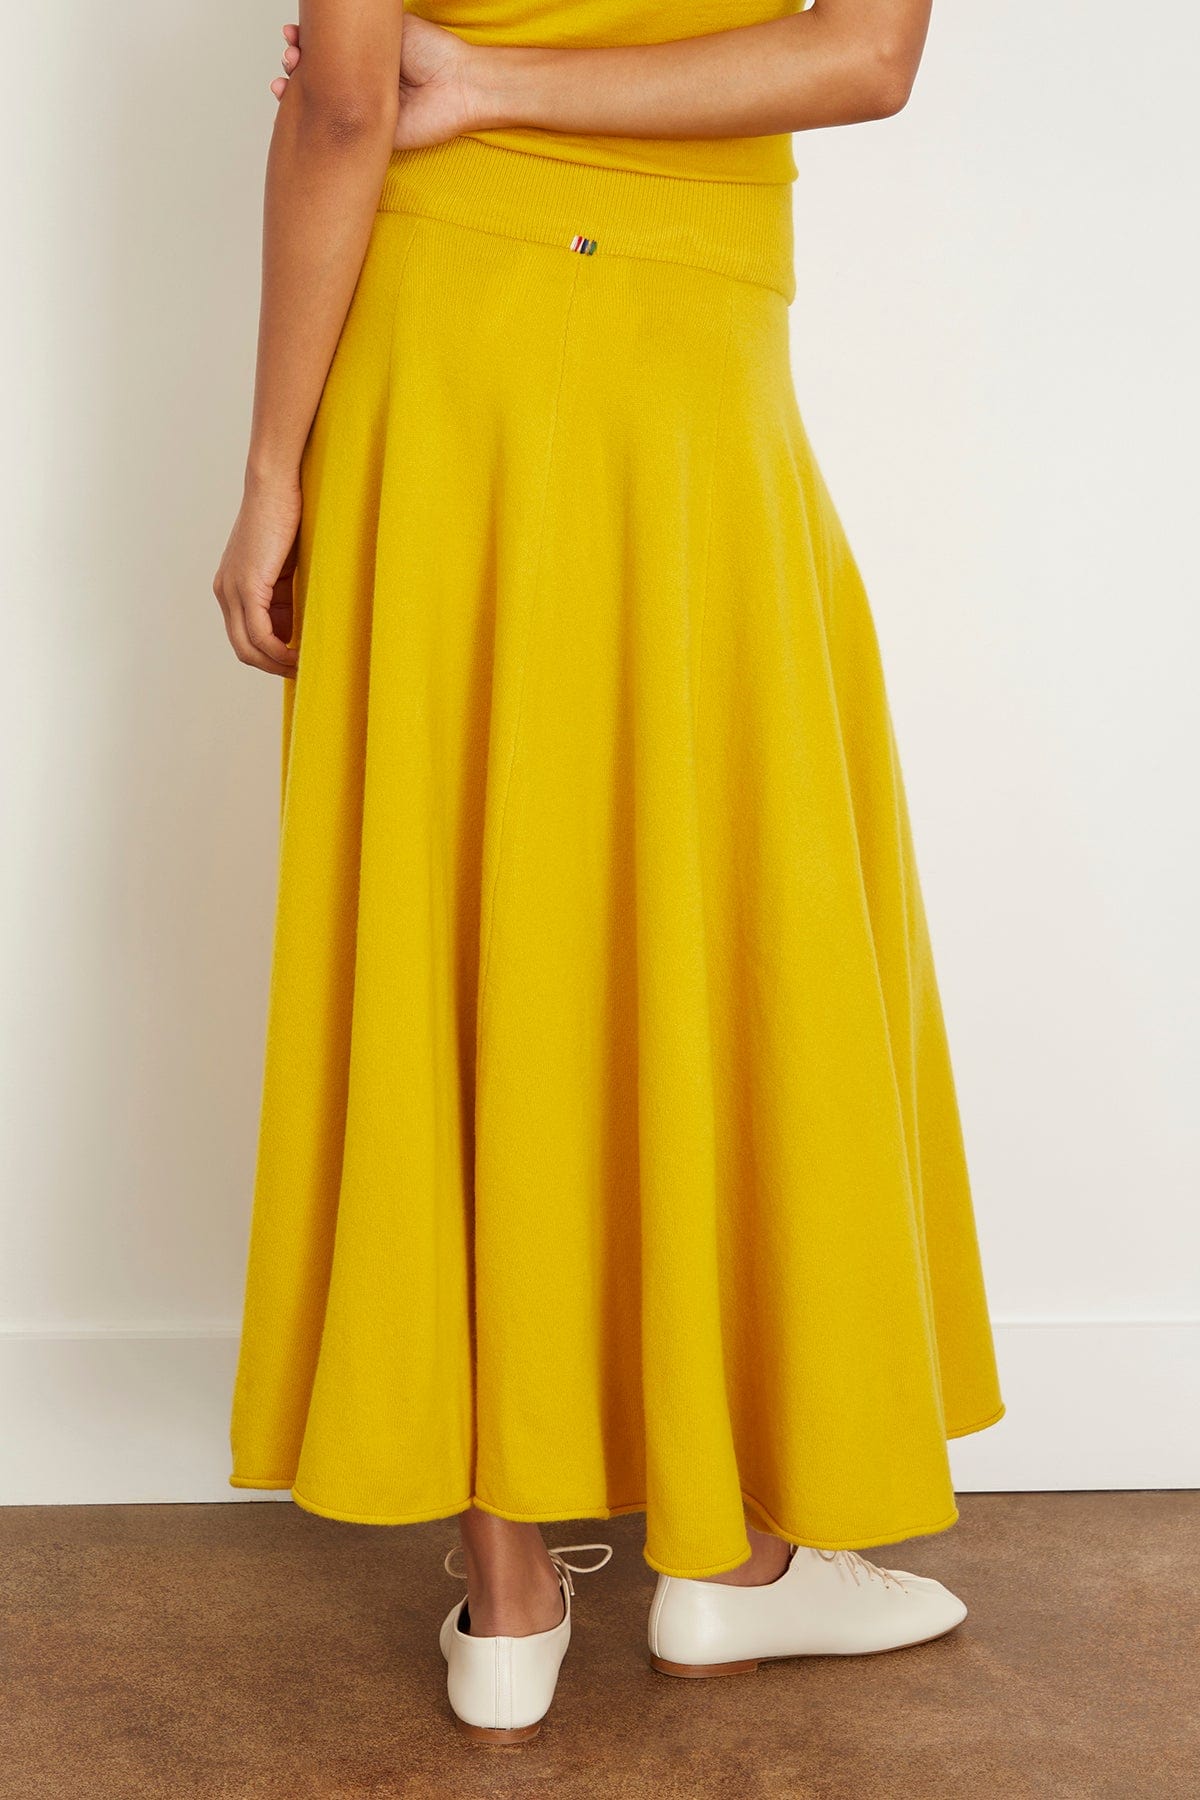 Extreme Cashmere Skirts Twirl Skirt in Sunflower Extreme Cashmere Twirl Skirt in Sunflower